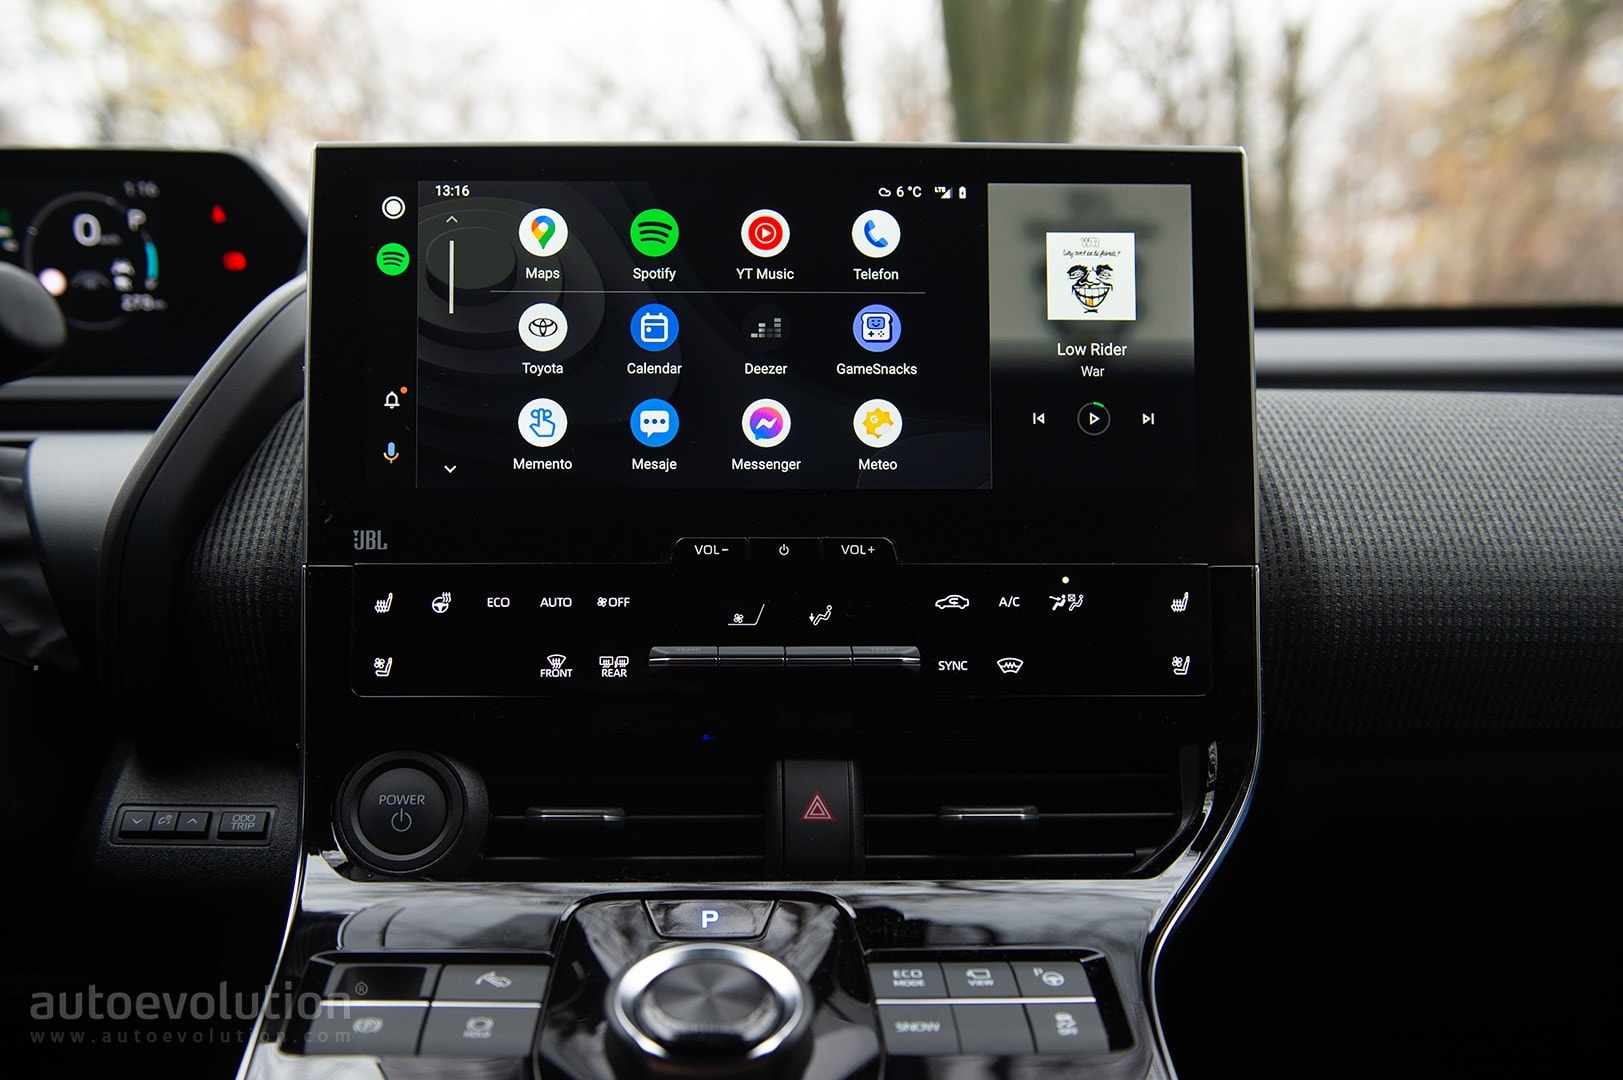 Android Auto 7.6 is now rolling out - 9to5Google